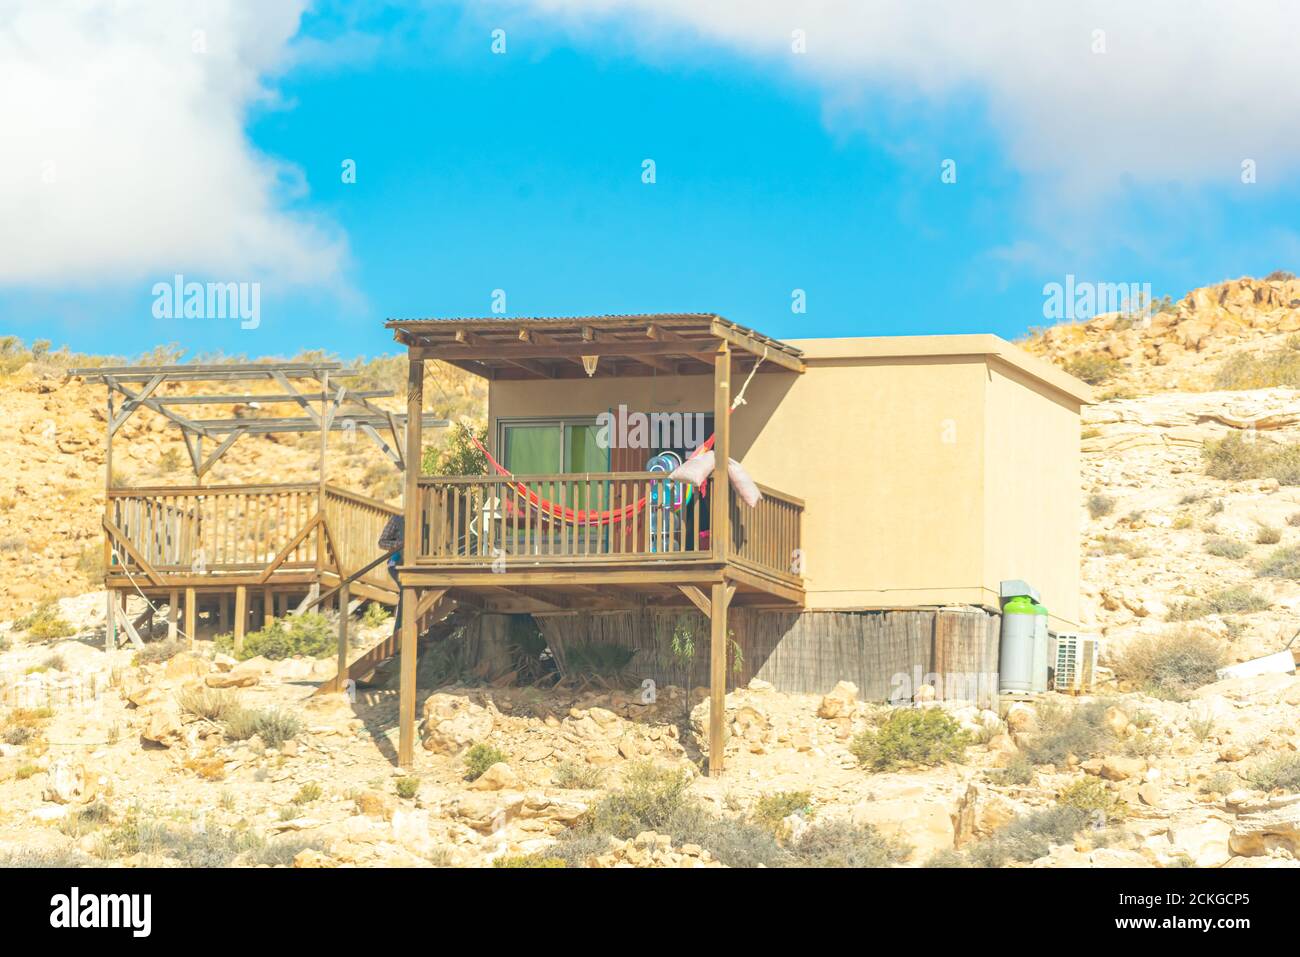 Exterior of an ecological, self sufficient, home in the Negev desert, Israel Stock Photo